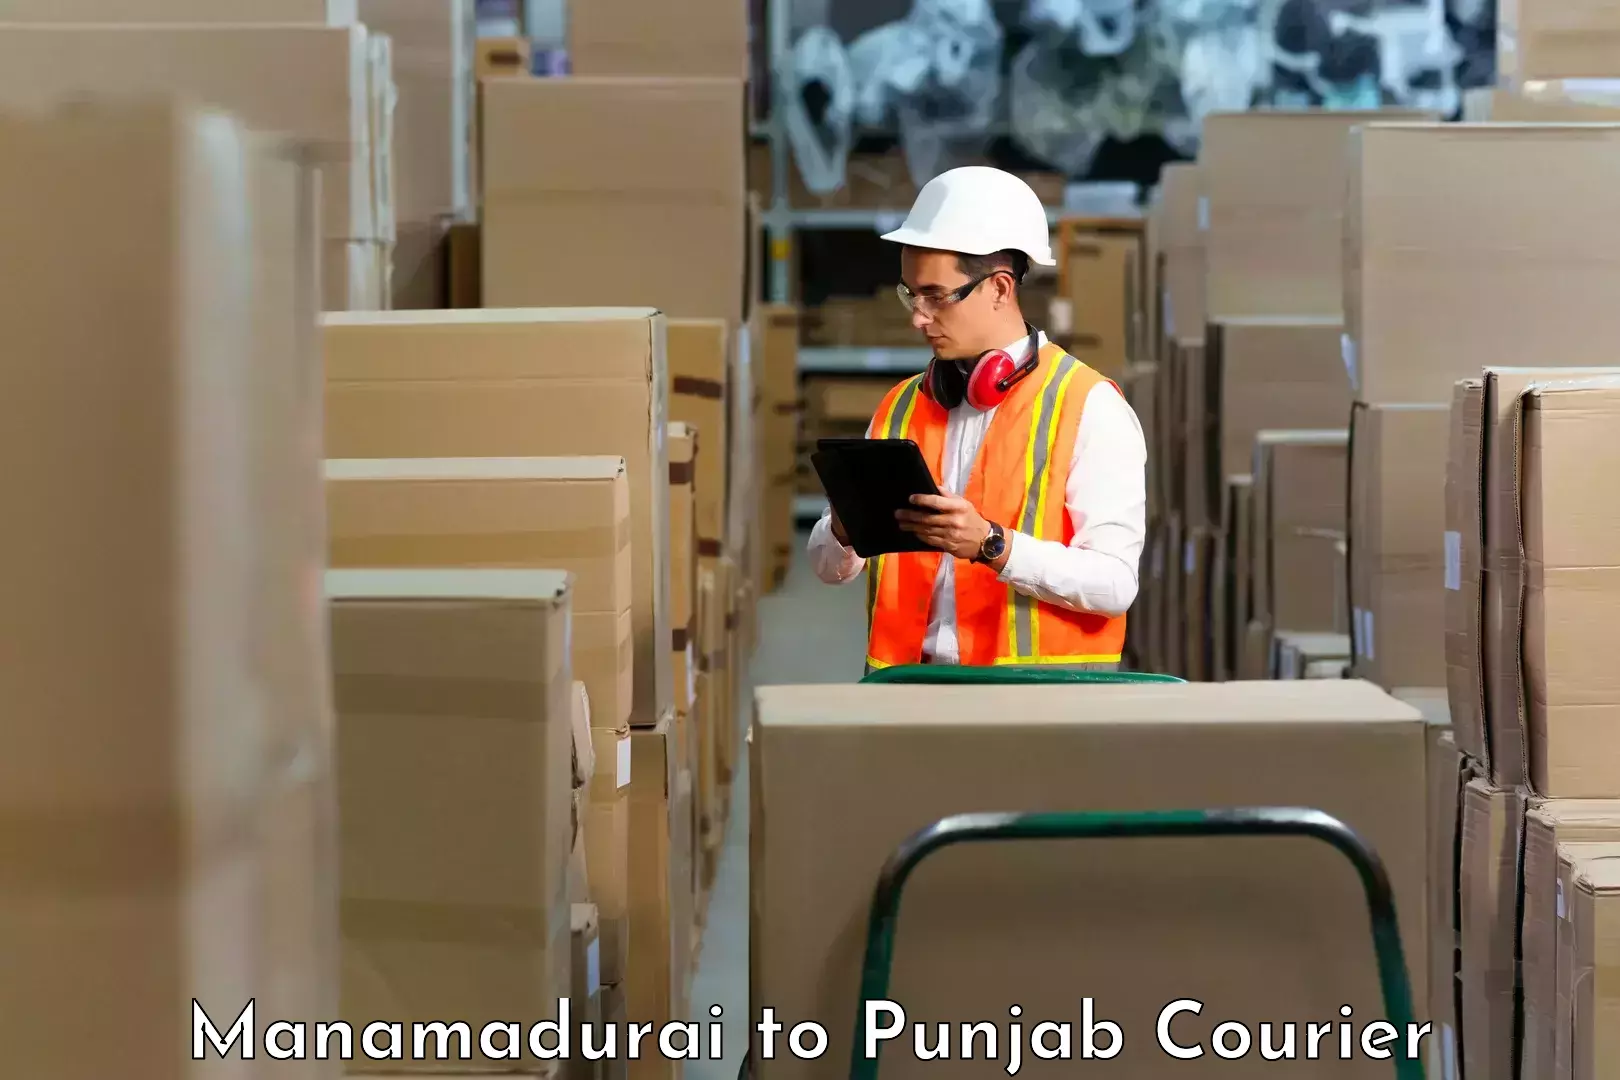 Automated parcel services Manamadurai to Mohali